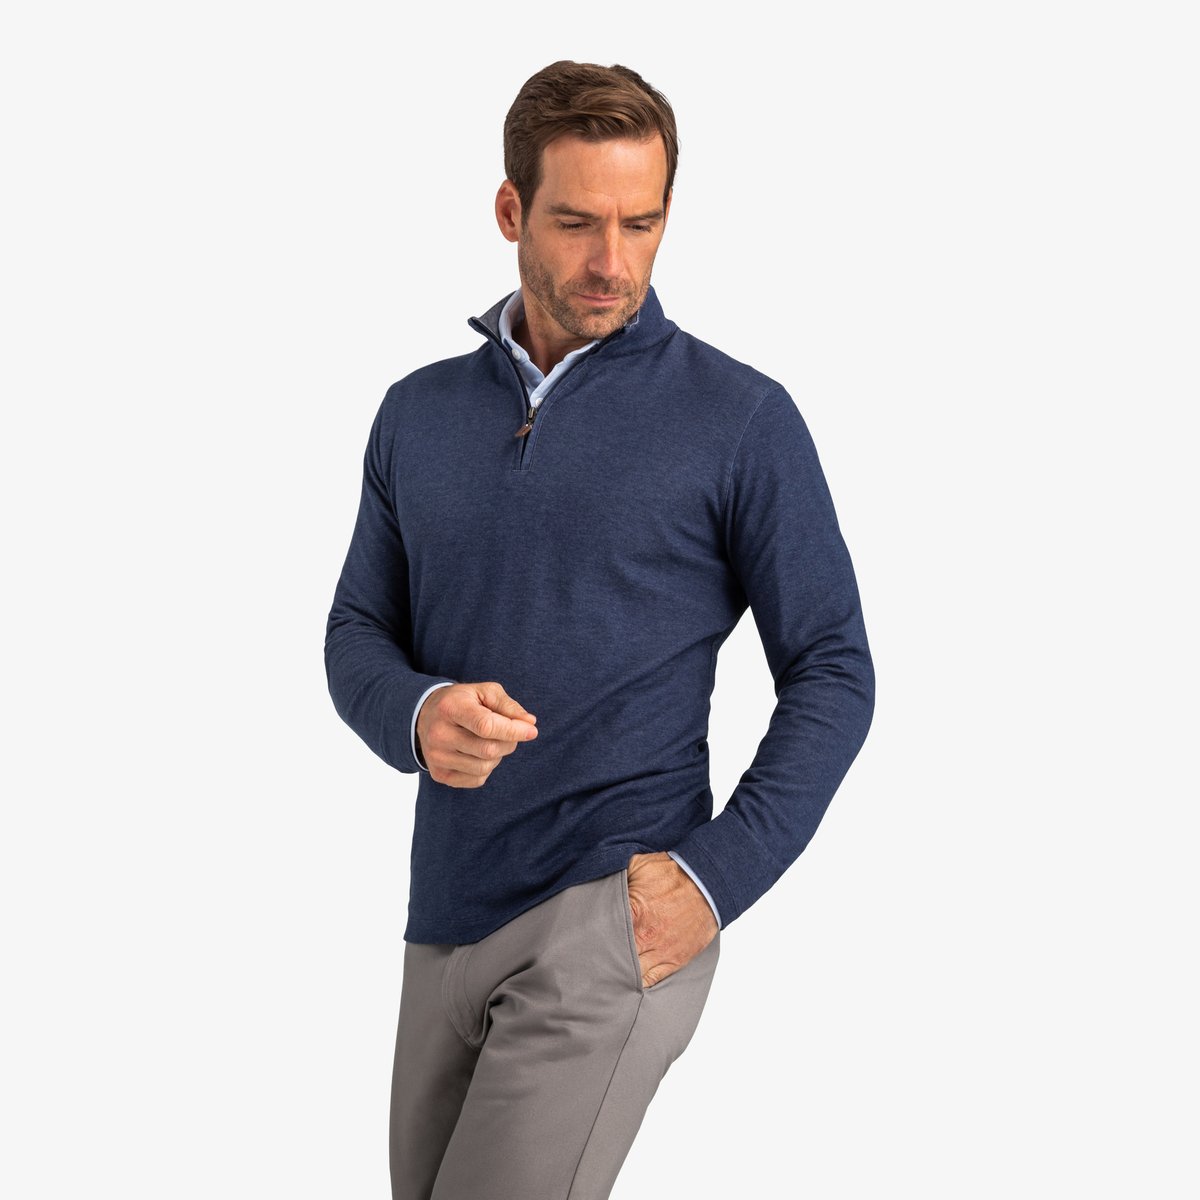 VESTS, QUARTER-ZIPS, AND BLAZERS: Upgrade Your Fall Style With Mizzen ...